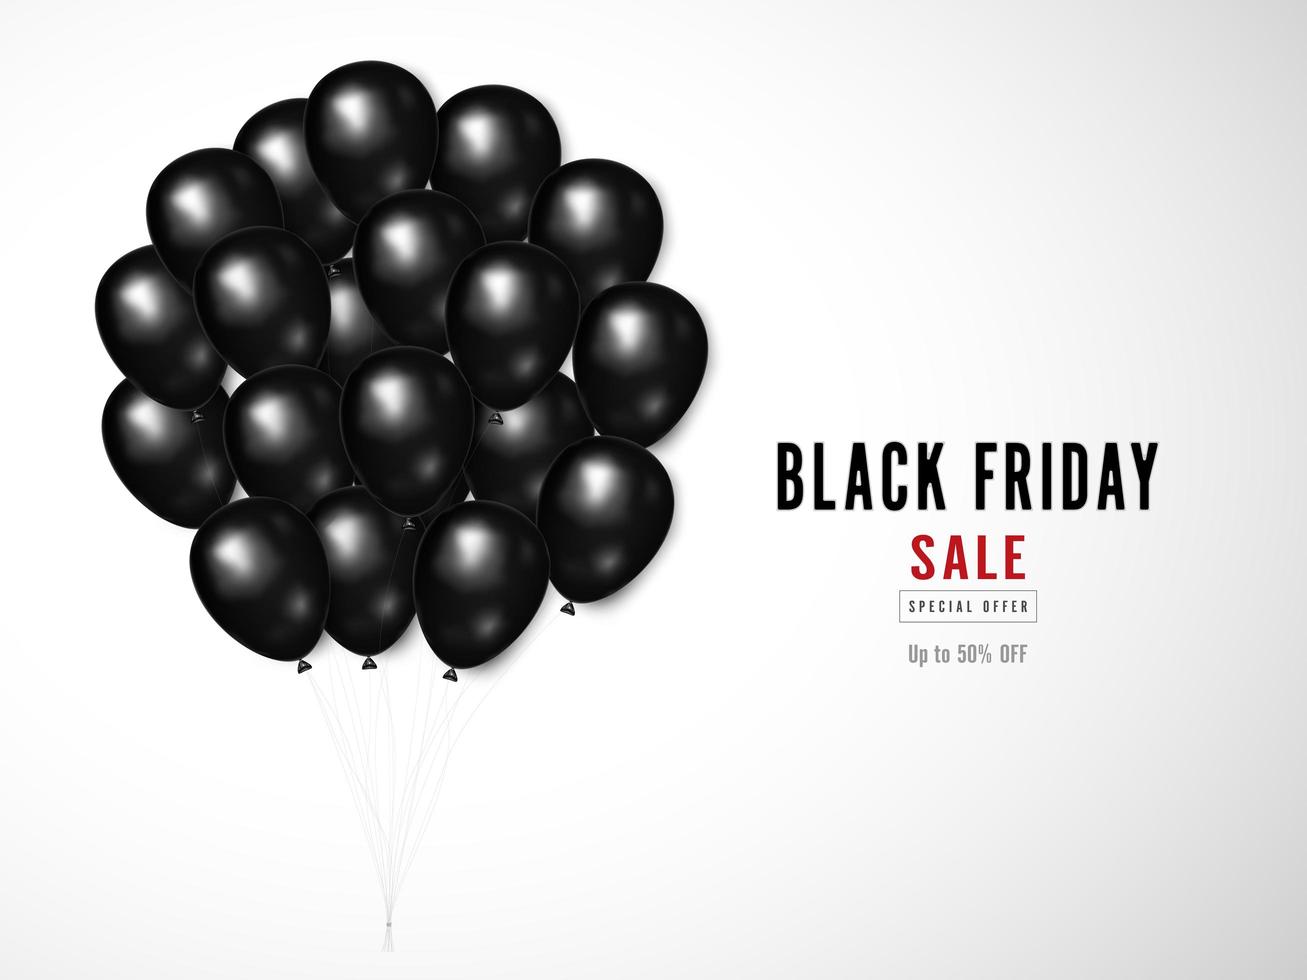 Black Friday sale design with shiny black balloon bouquet vector